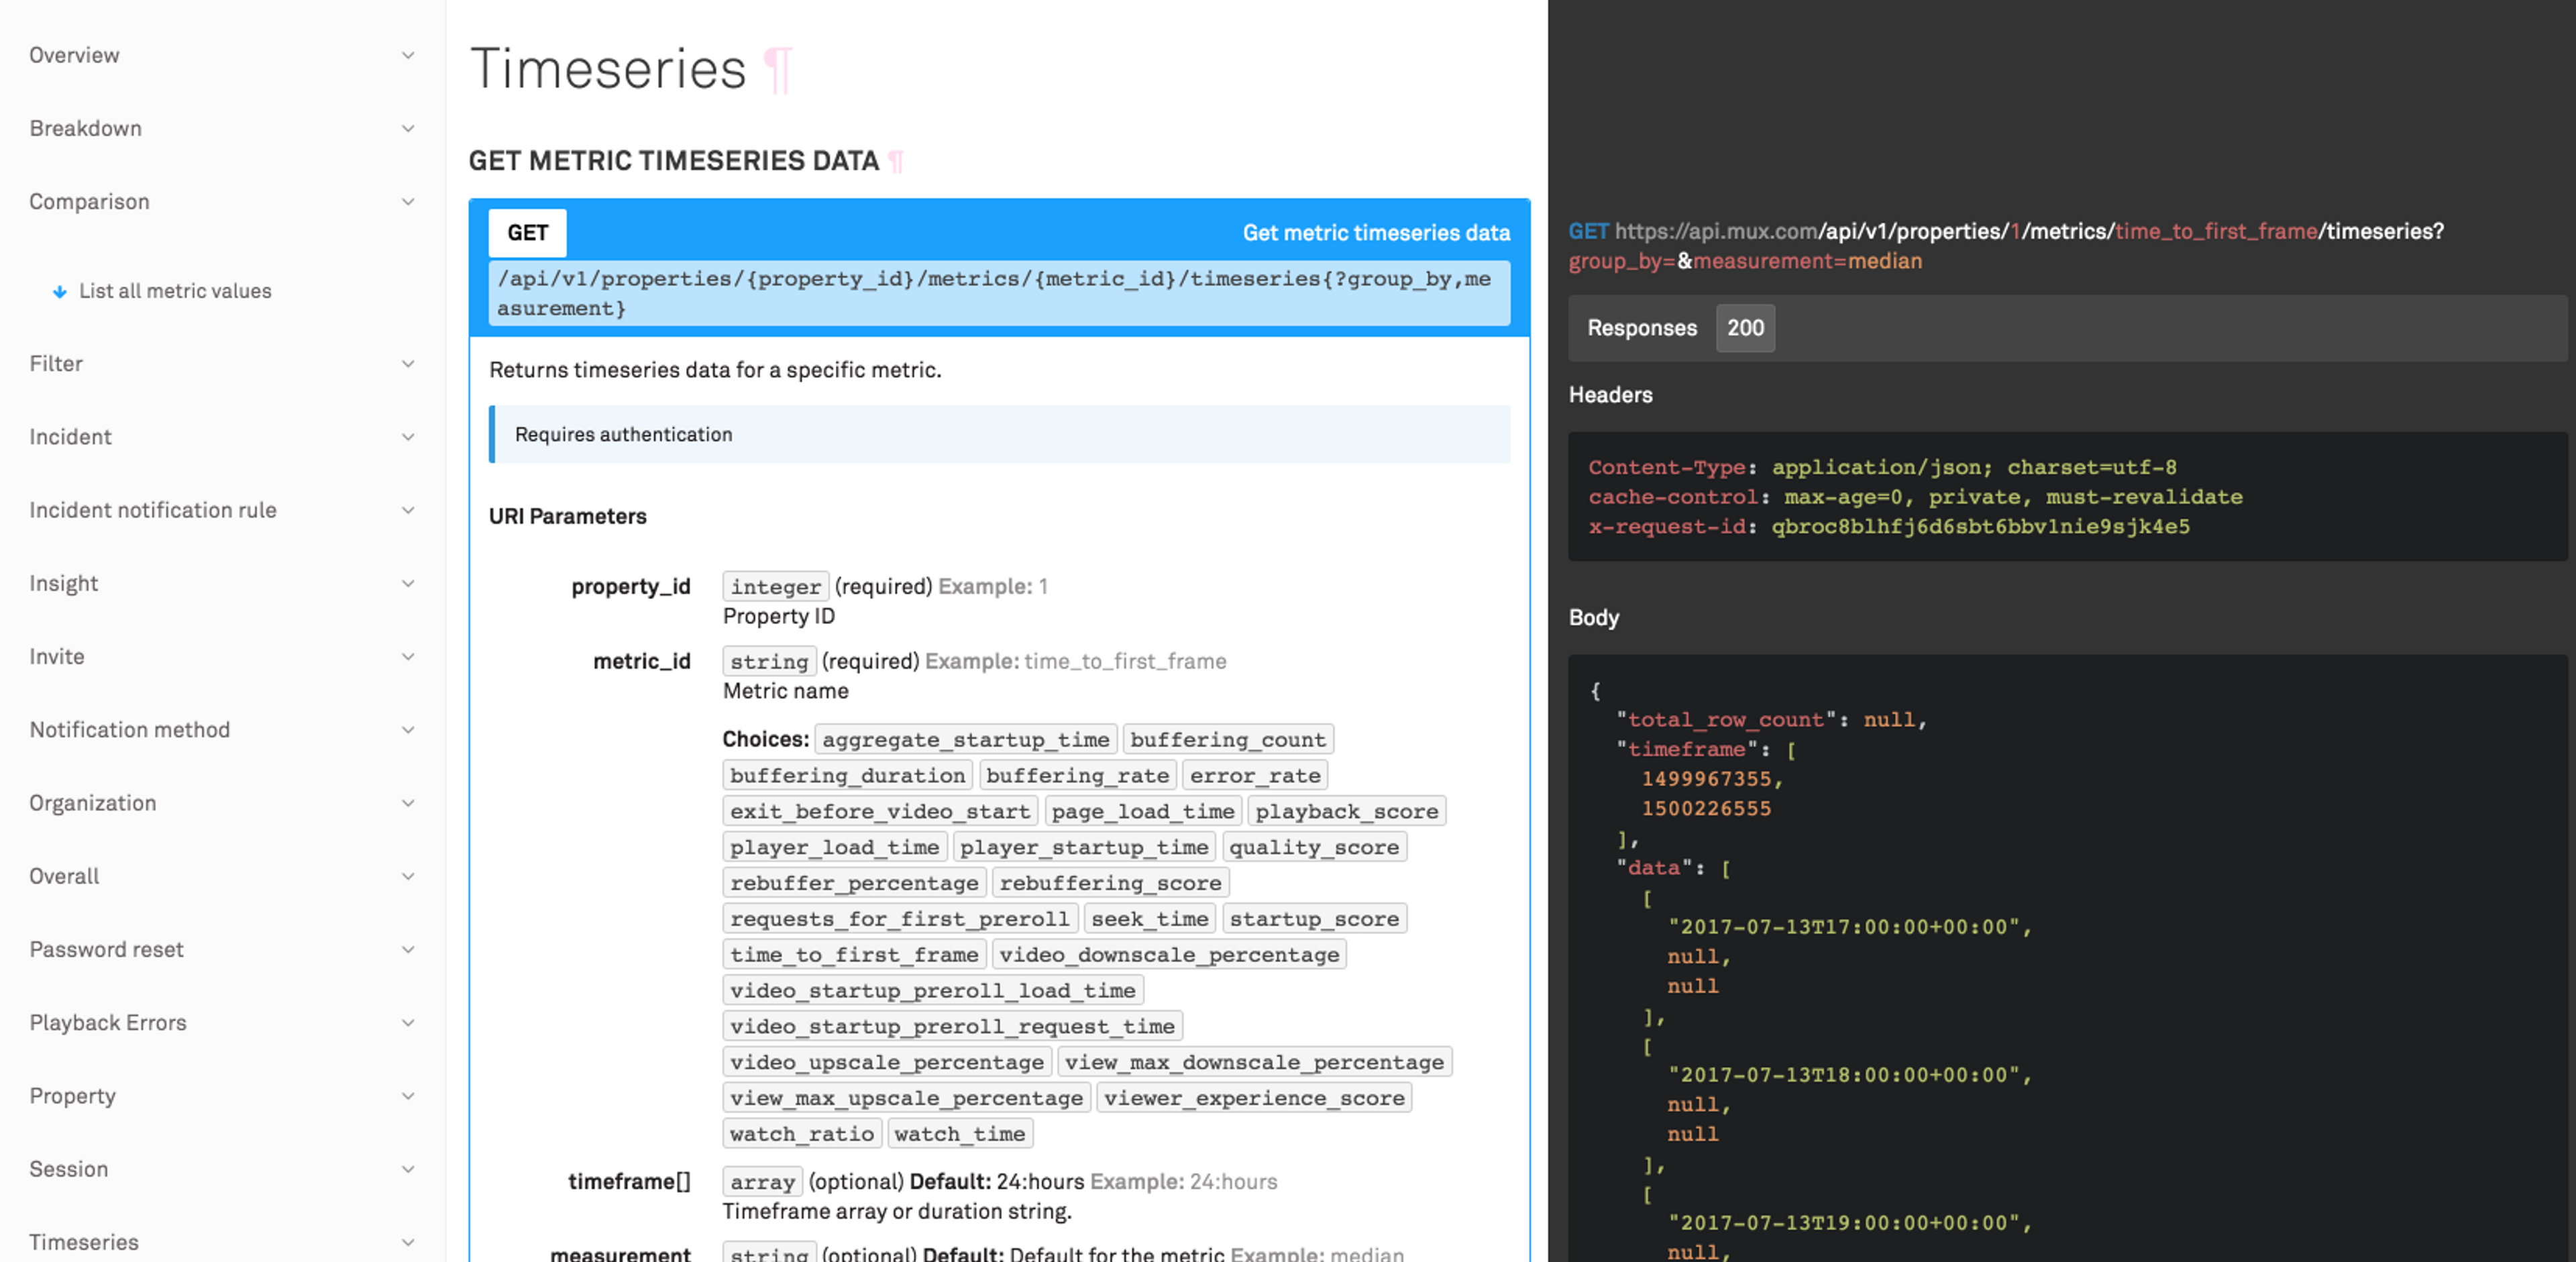 It's your data, build things with it: Announcing public beta access to our API